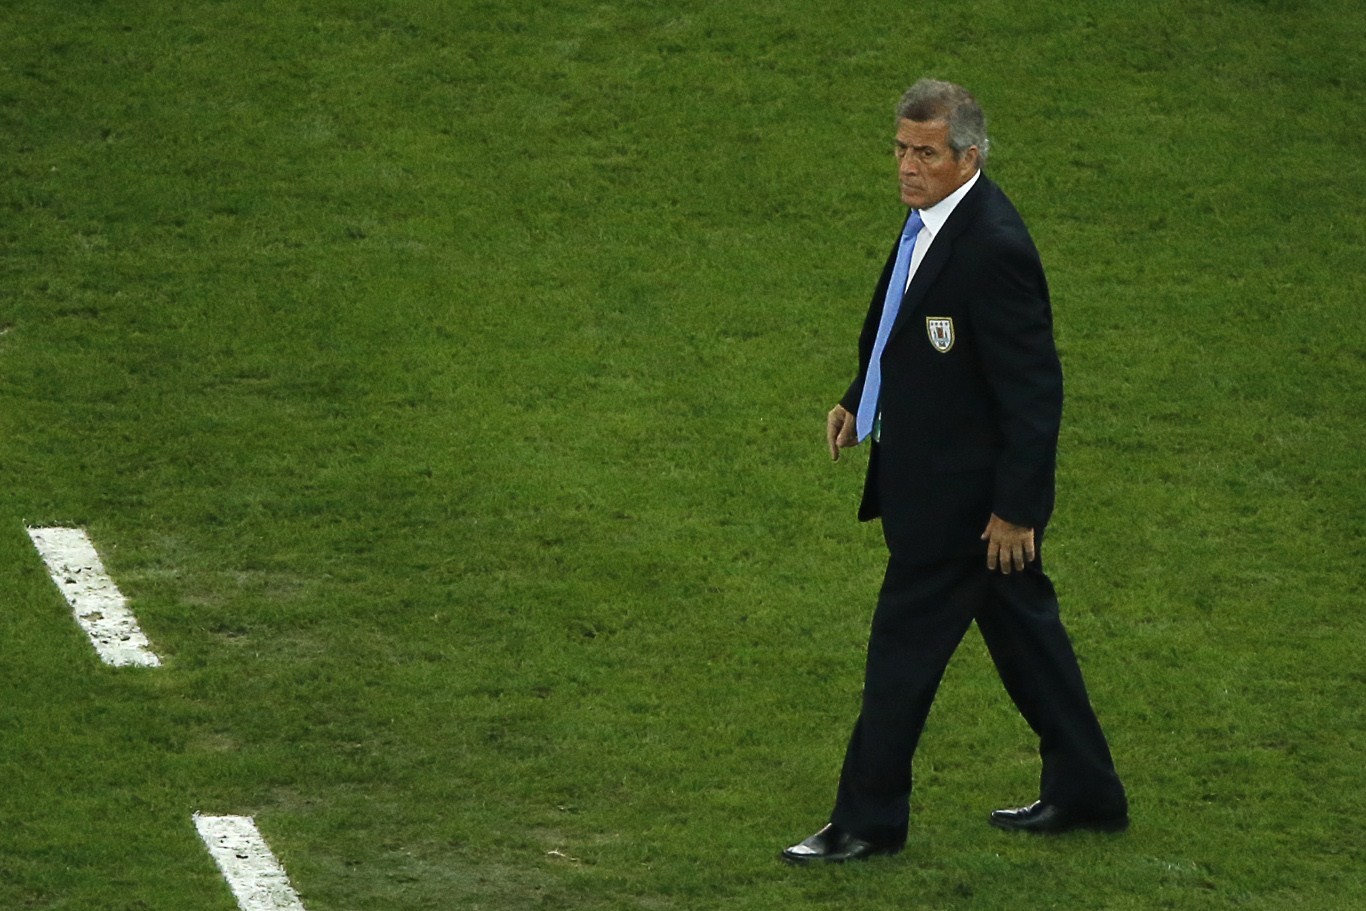 Uruguay's coach Oscar Tabarez looks on during the Round of 16 football match between Colombia and Uruguay at The Maracana Stadium in Rio de Janeiro on June 28, 2014,during the 2014 FIFA World Cup. AFP PHOTO / FABRIZIO BENSCH/POOL (Photo credit should read FABRIZIO BENSCH/AFP/Getty Images)